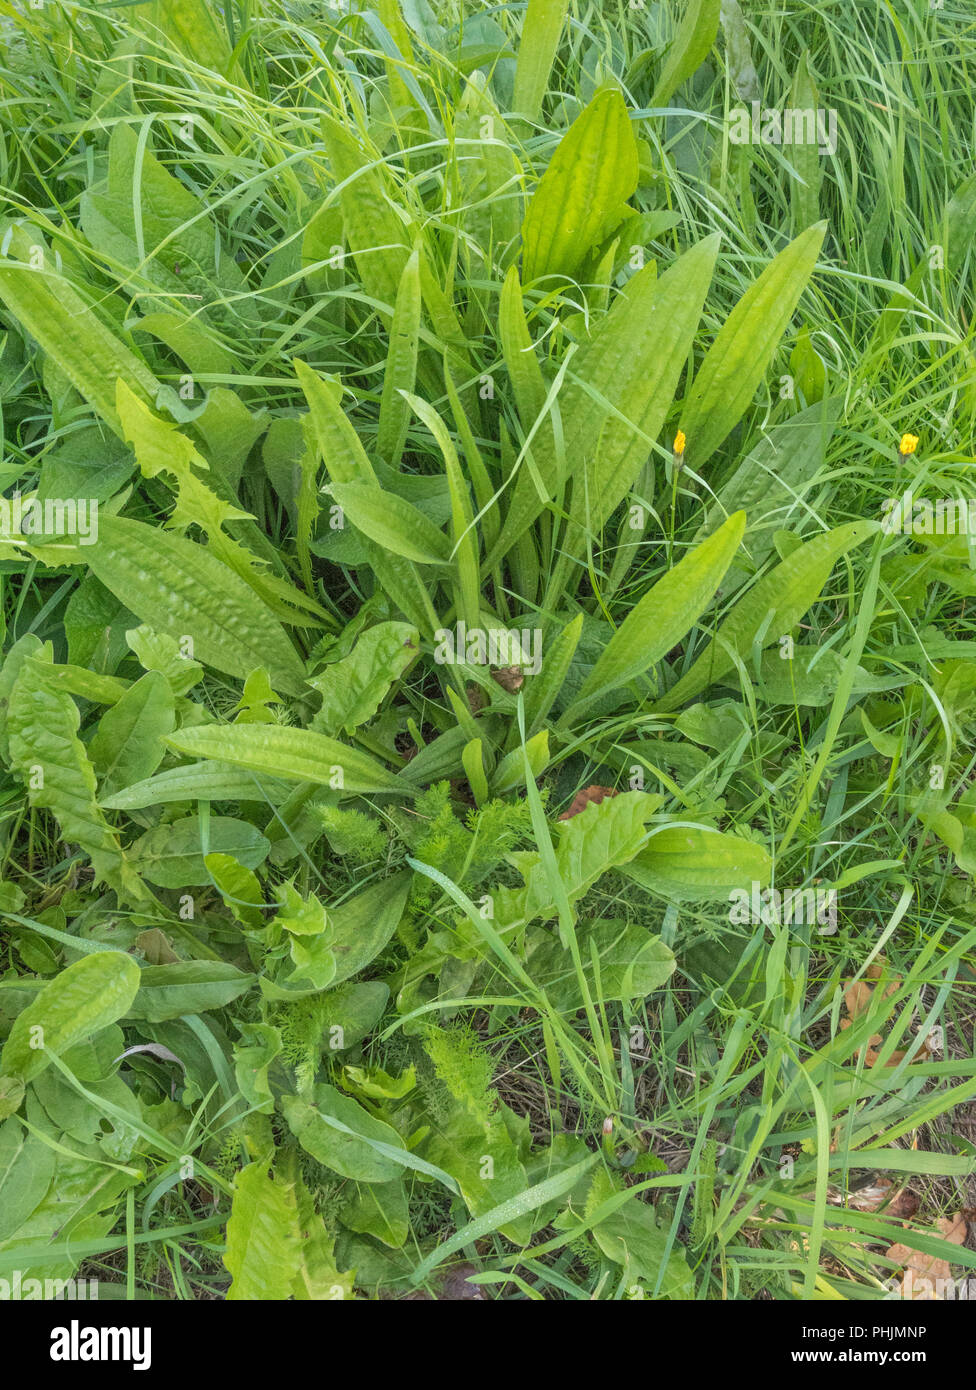 Leaves / foliage of the common weed Ribwort Plantain (Plantago lanceolata) which can be used as a foraged food once cooked (more of a survivial food) Stock Photo